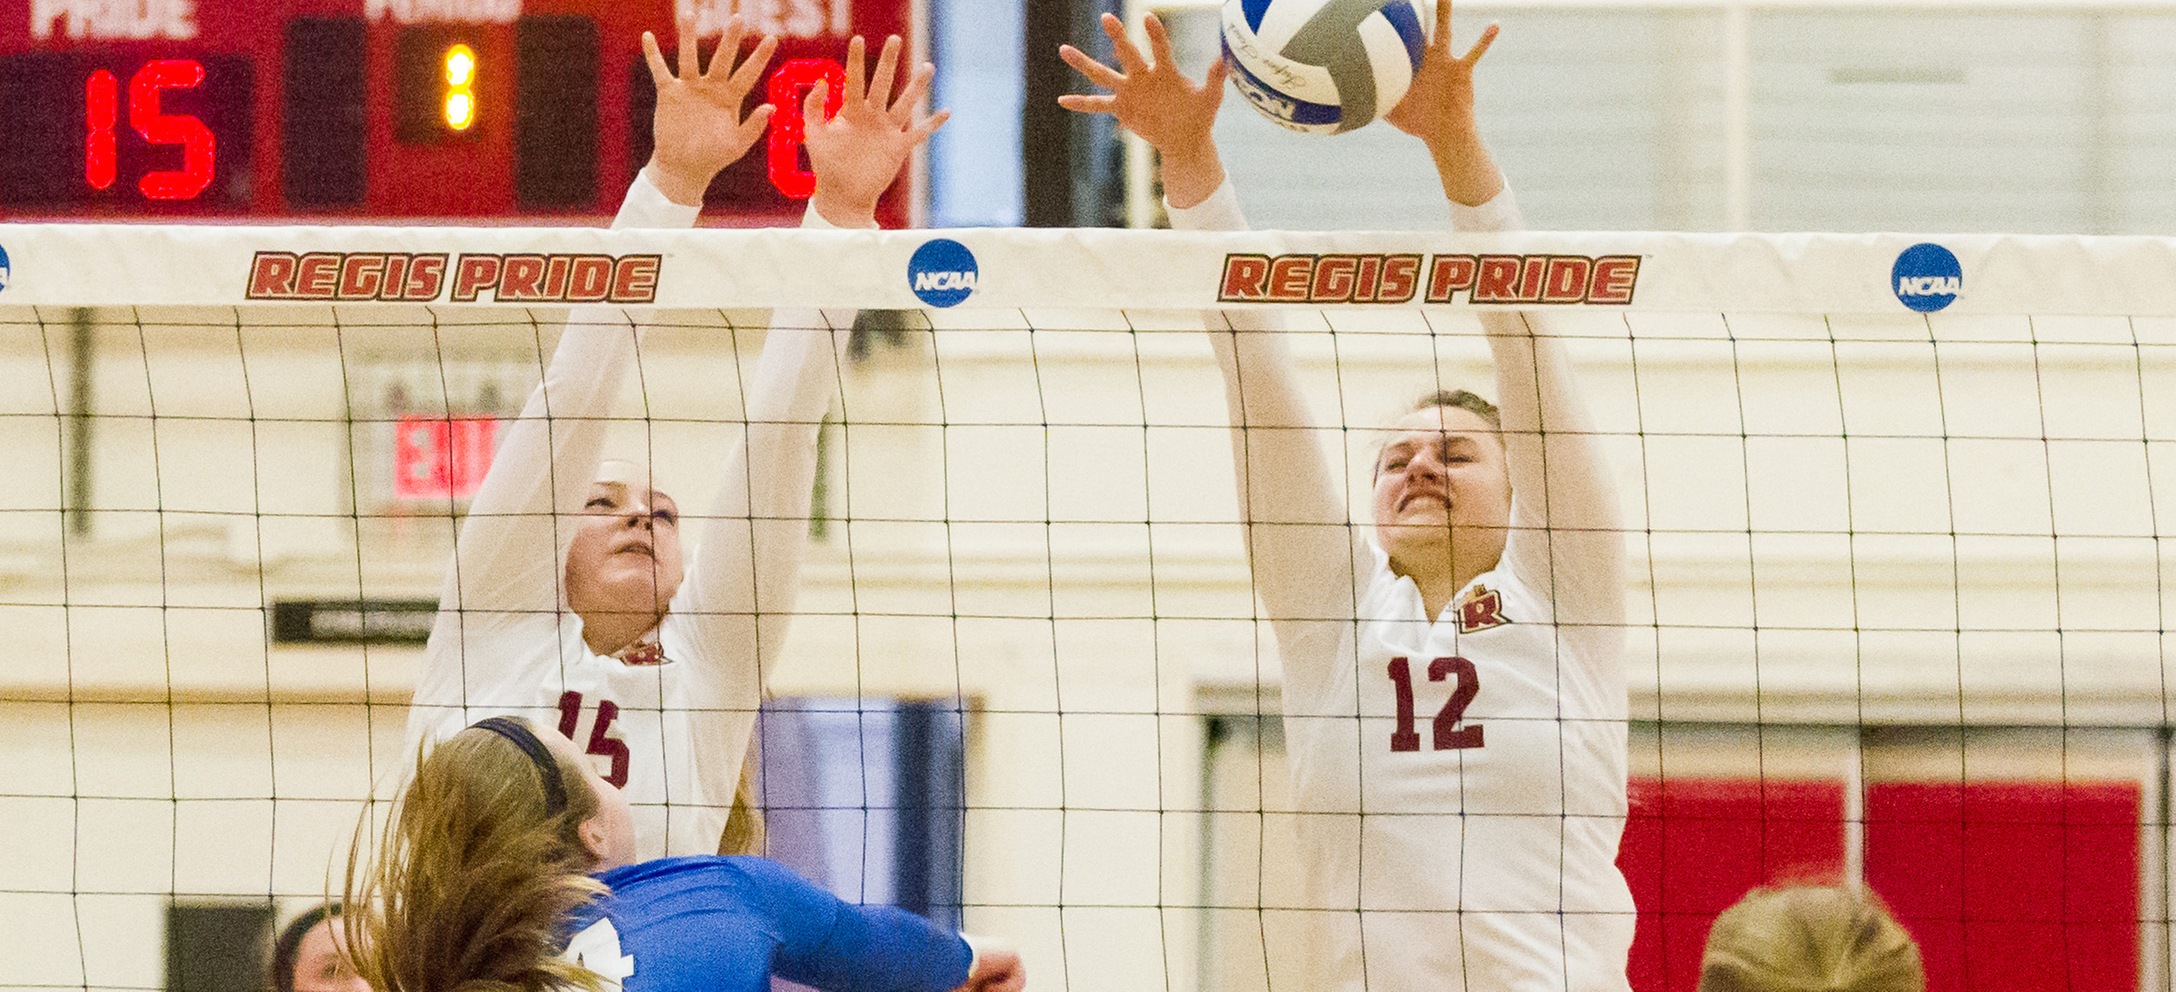 Faber, Veasey Post Career Highs, Women's Volleyball Falls At Brandeis